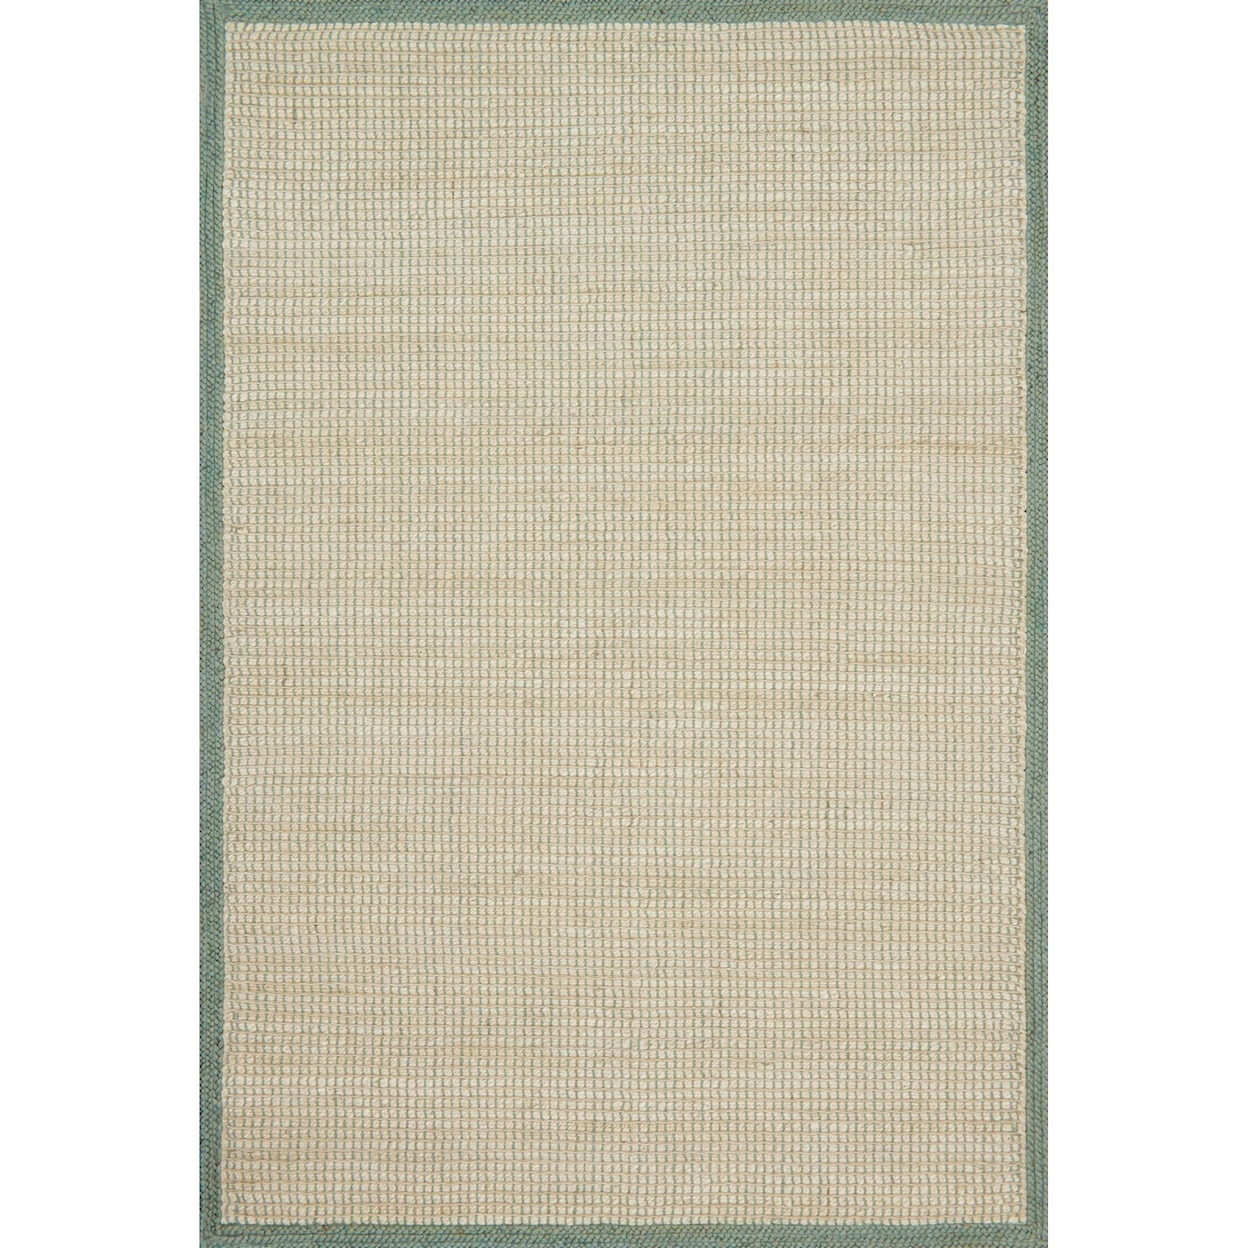 Magnolia Home by Joanna Gaines for Loloi Sydney 5' 0" x 7' 6" Rectangle Rug